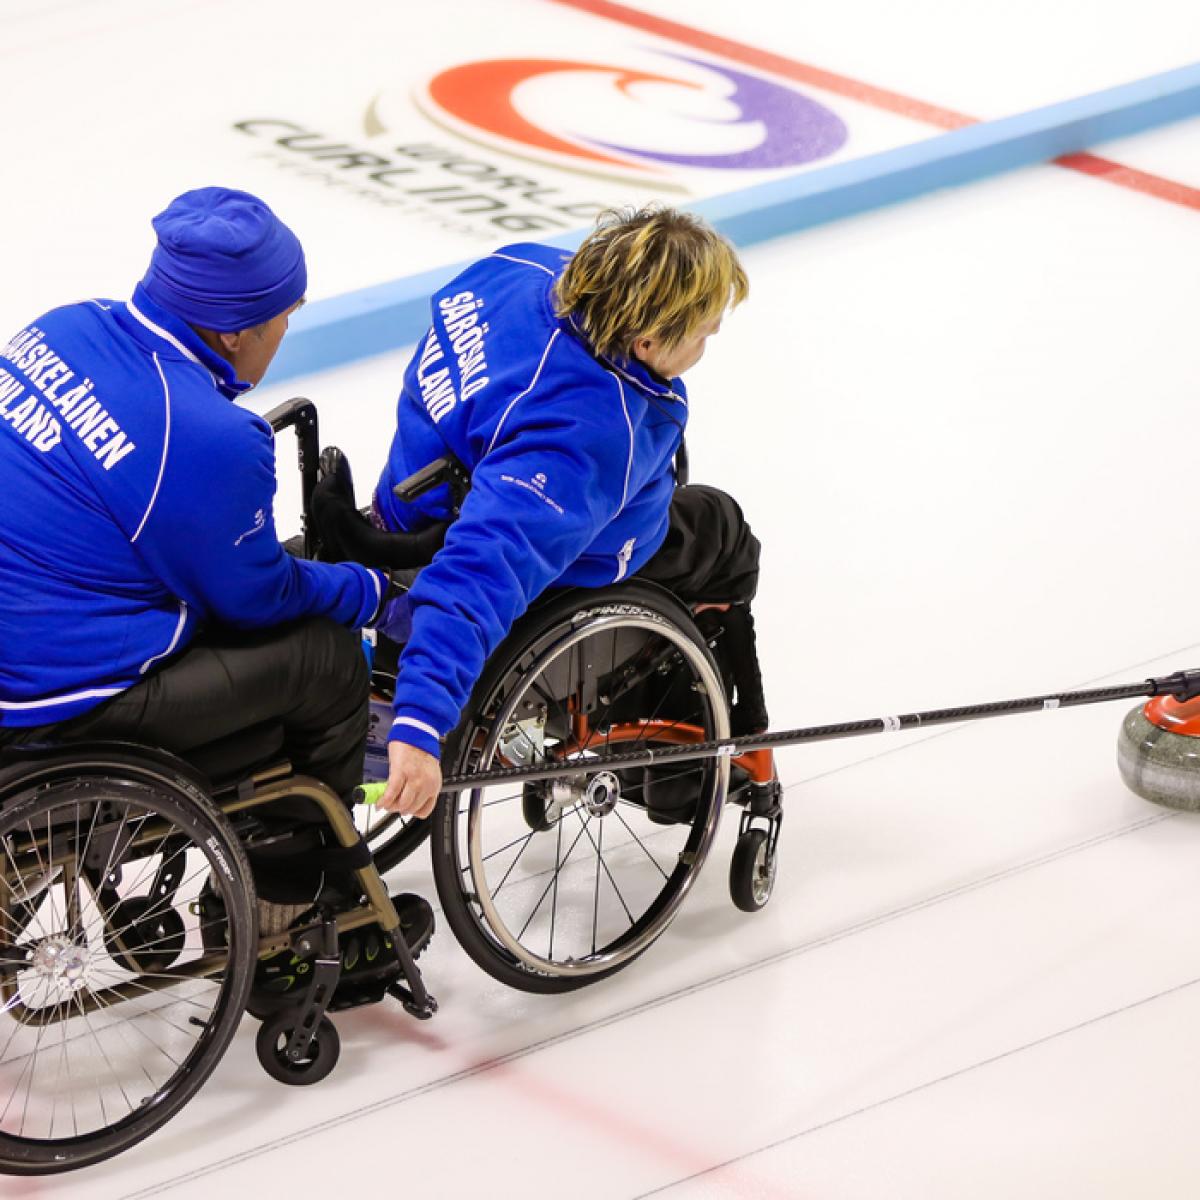 Finland defeated Scotland to capture the World Wheelchair-B Curling Championship 2016 title.